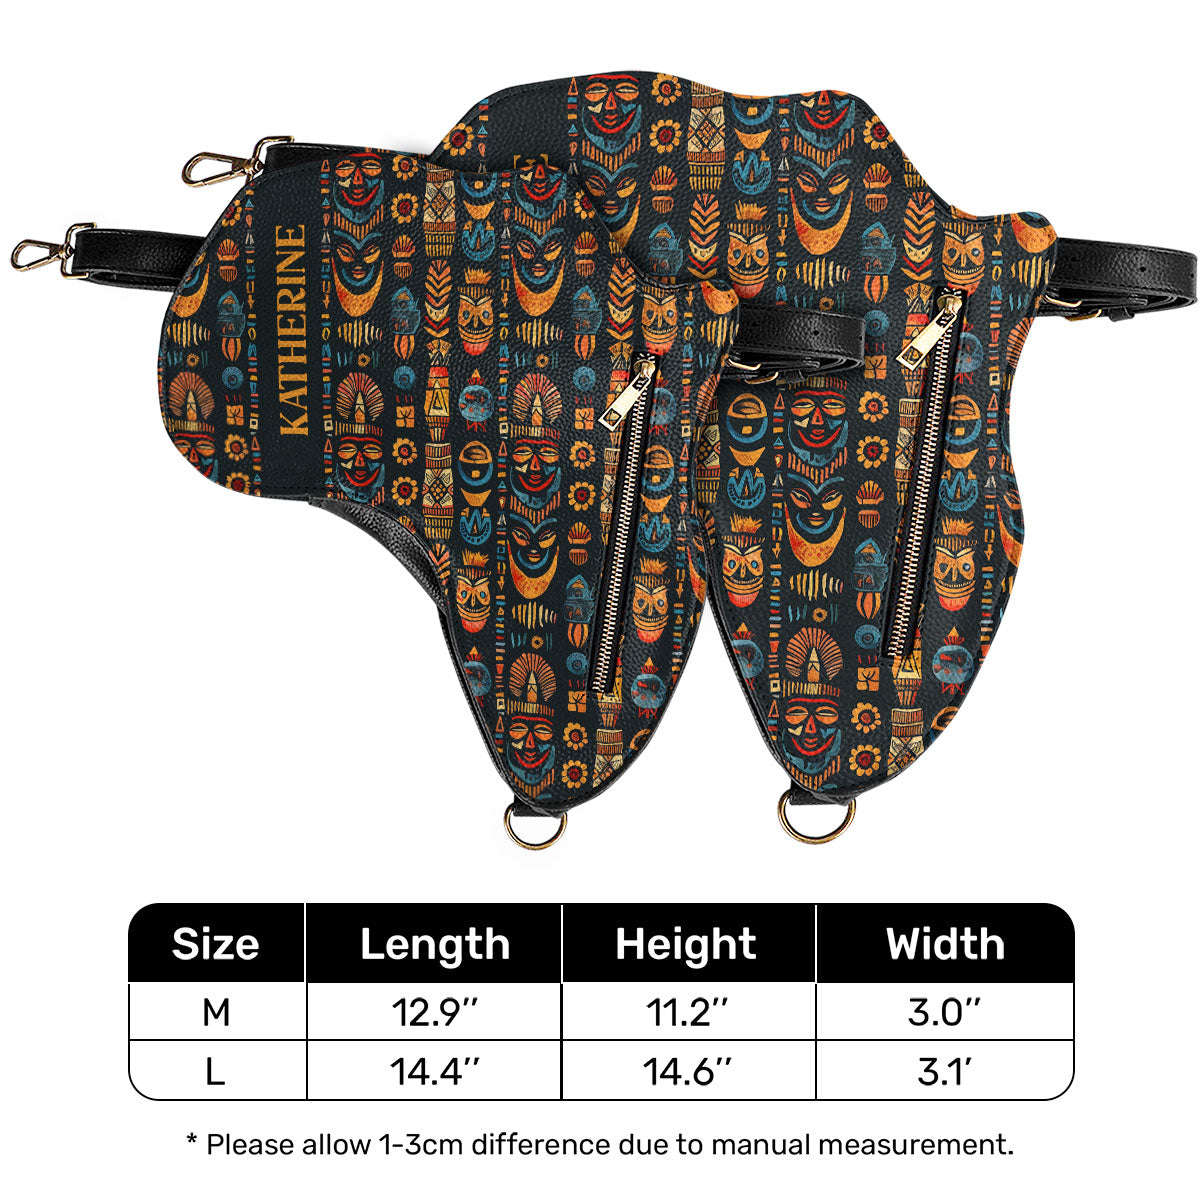 Africa Map 02 - Personalized Africa Bag SBT15